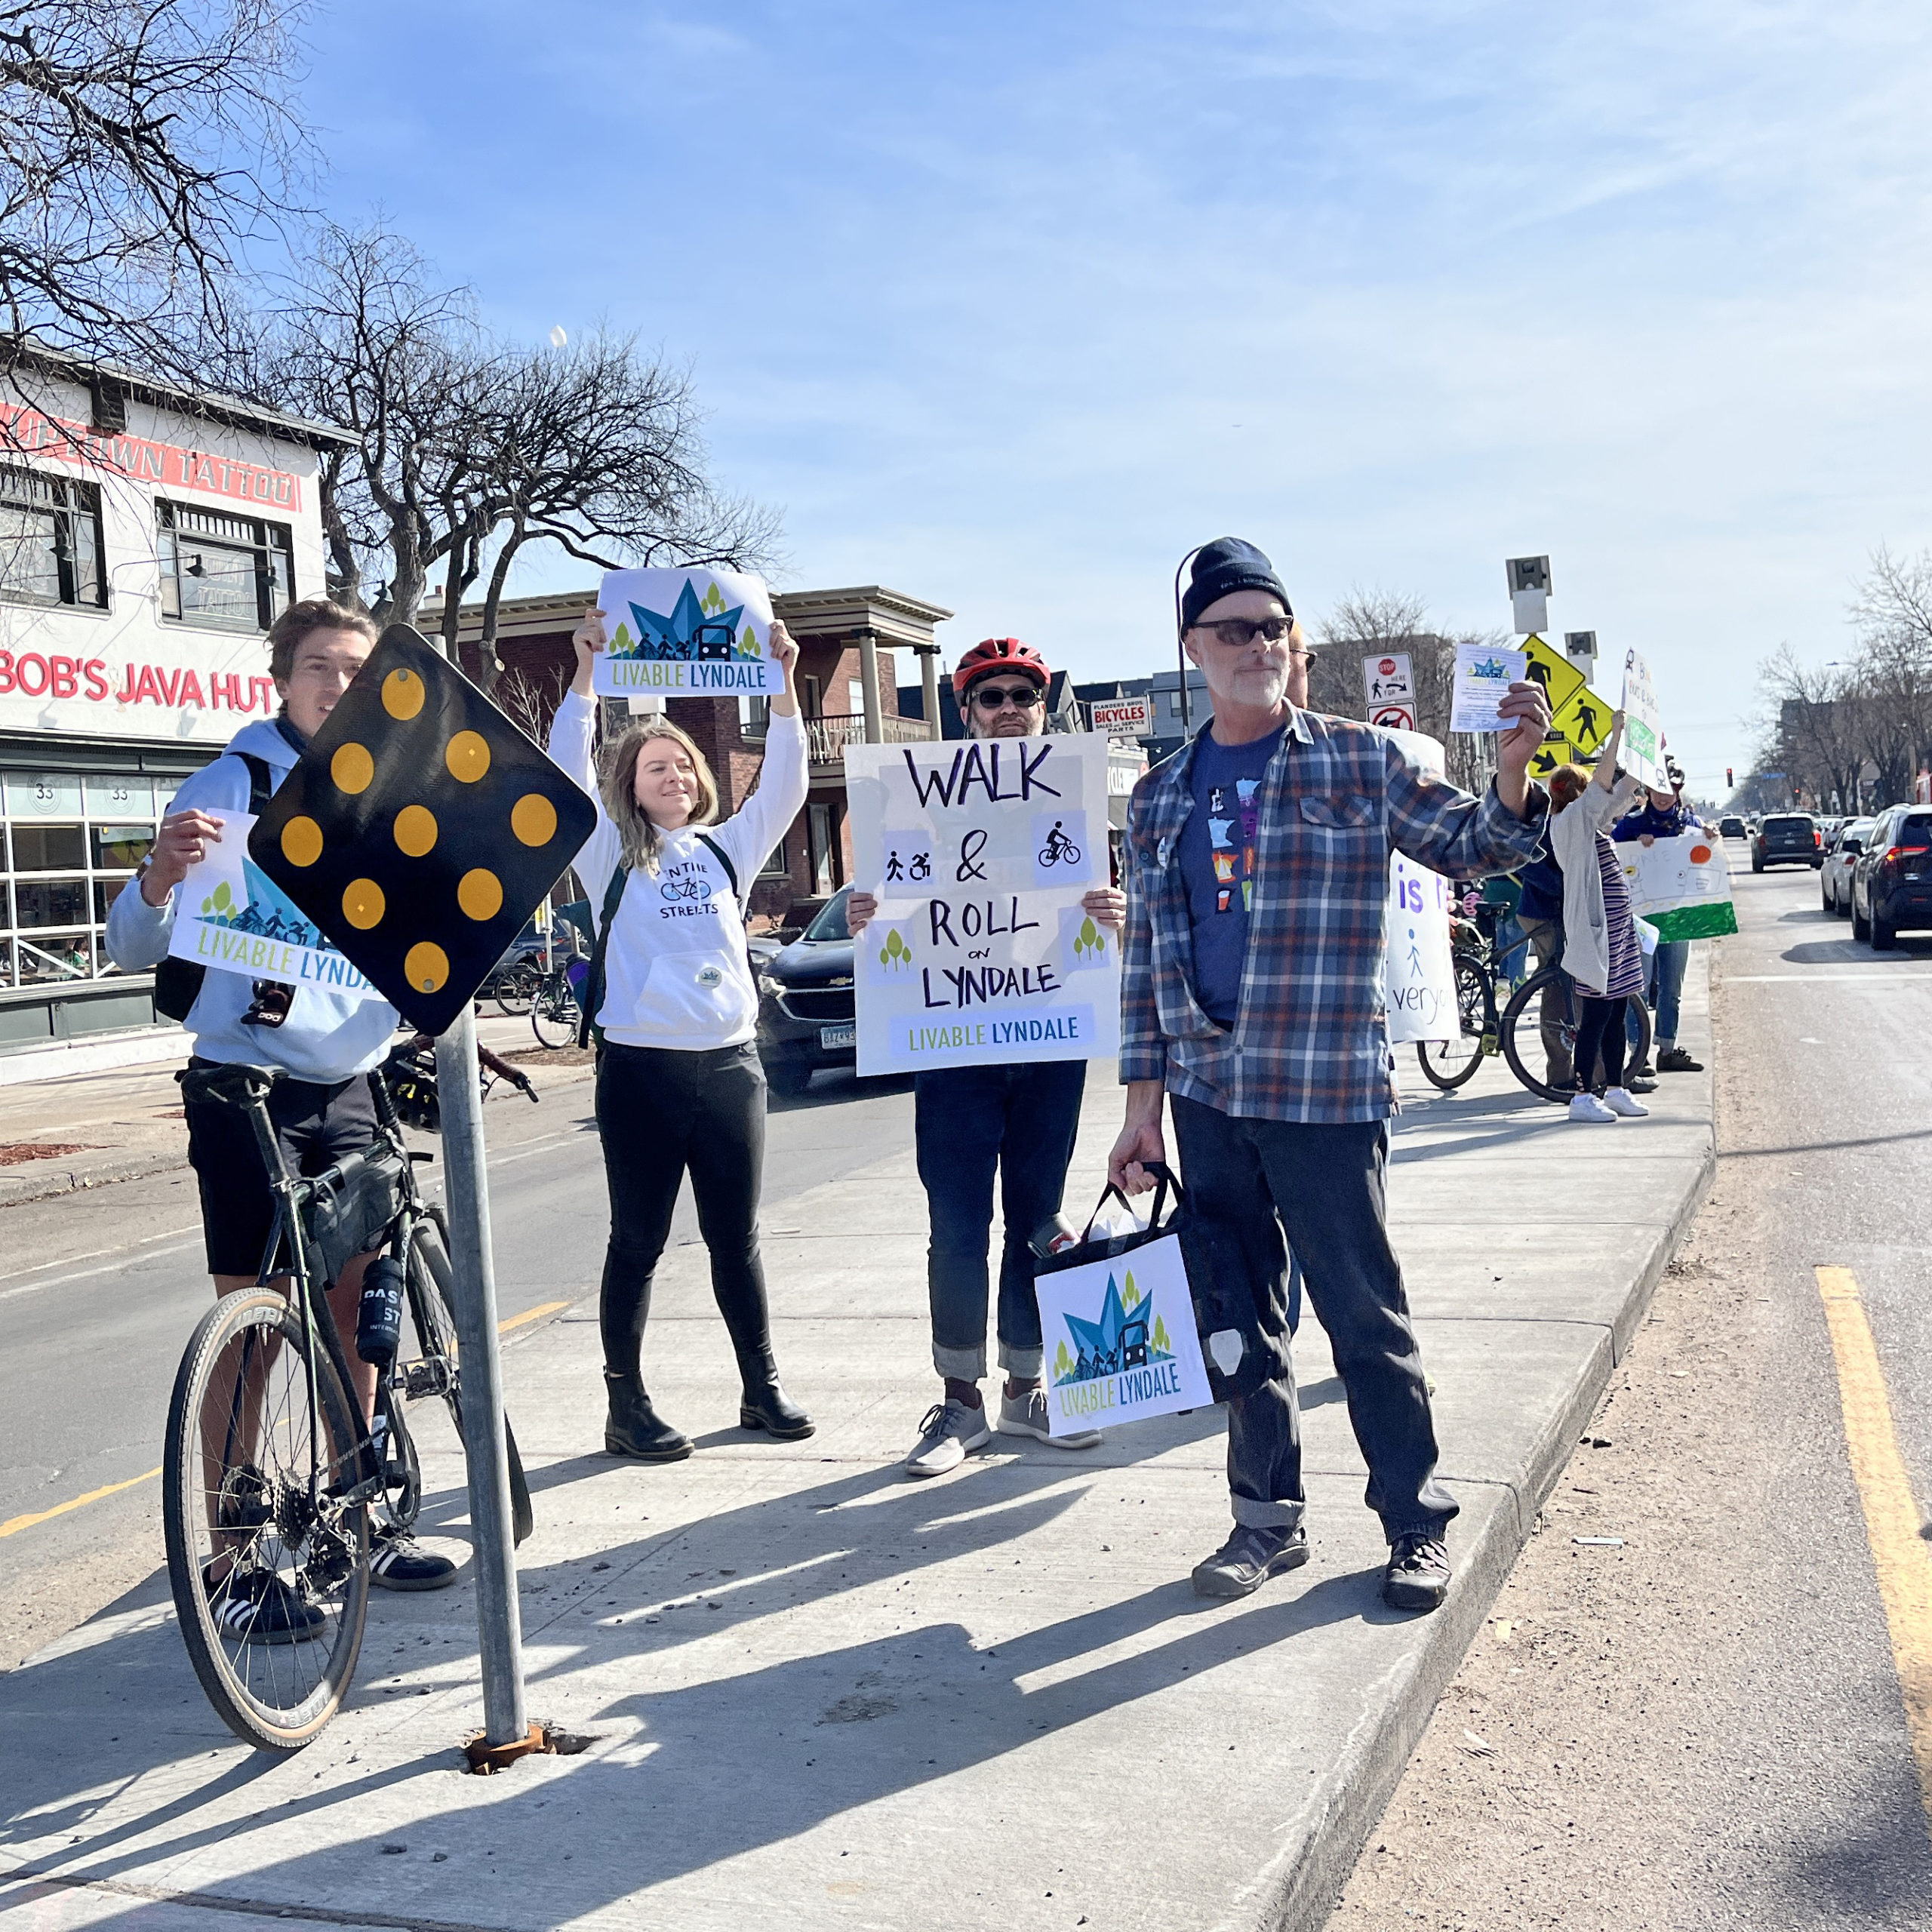 A group of community members hold Livable Lyndale signs while standing in the median together at Lyndale and 27th in Minneapolis